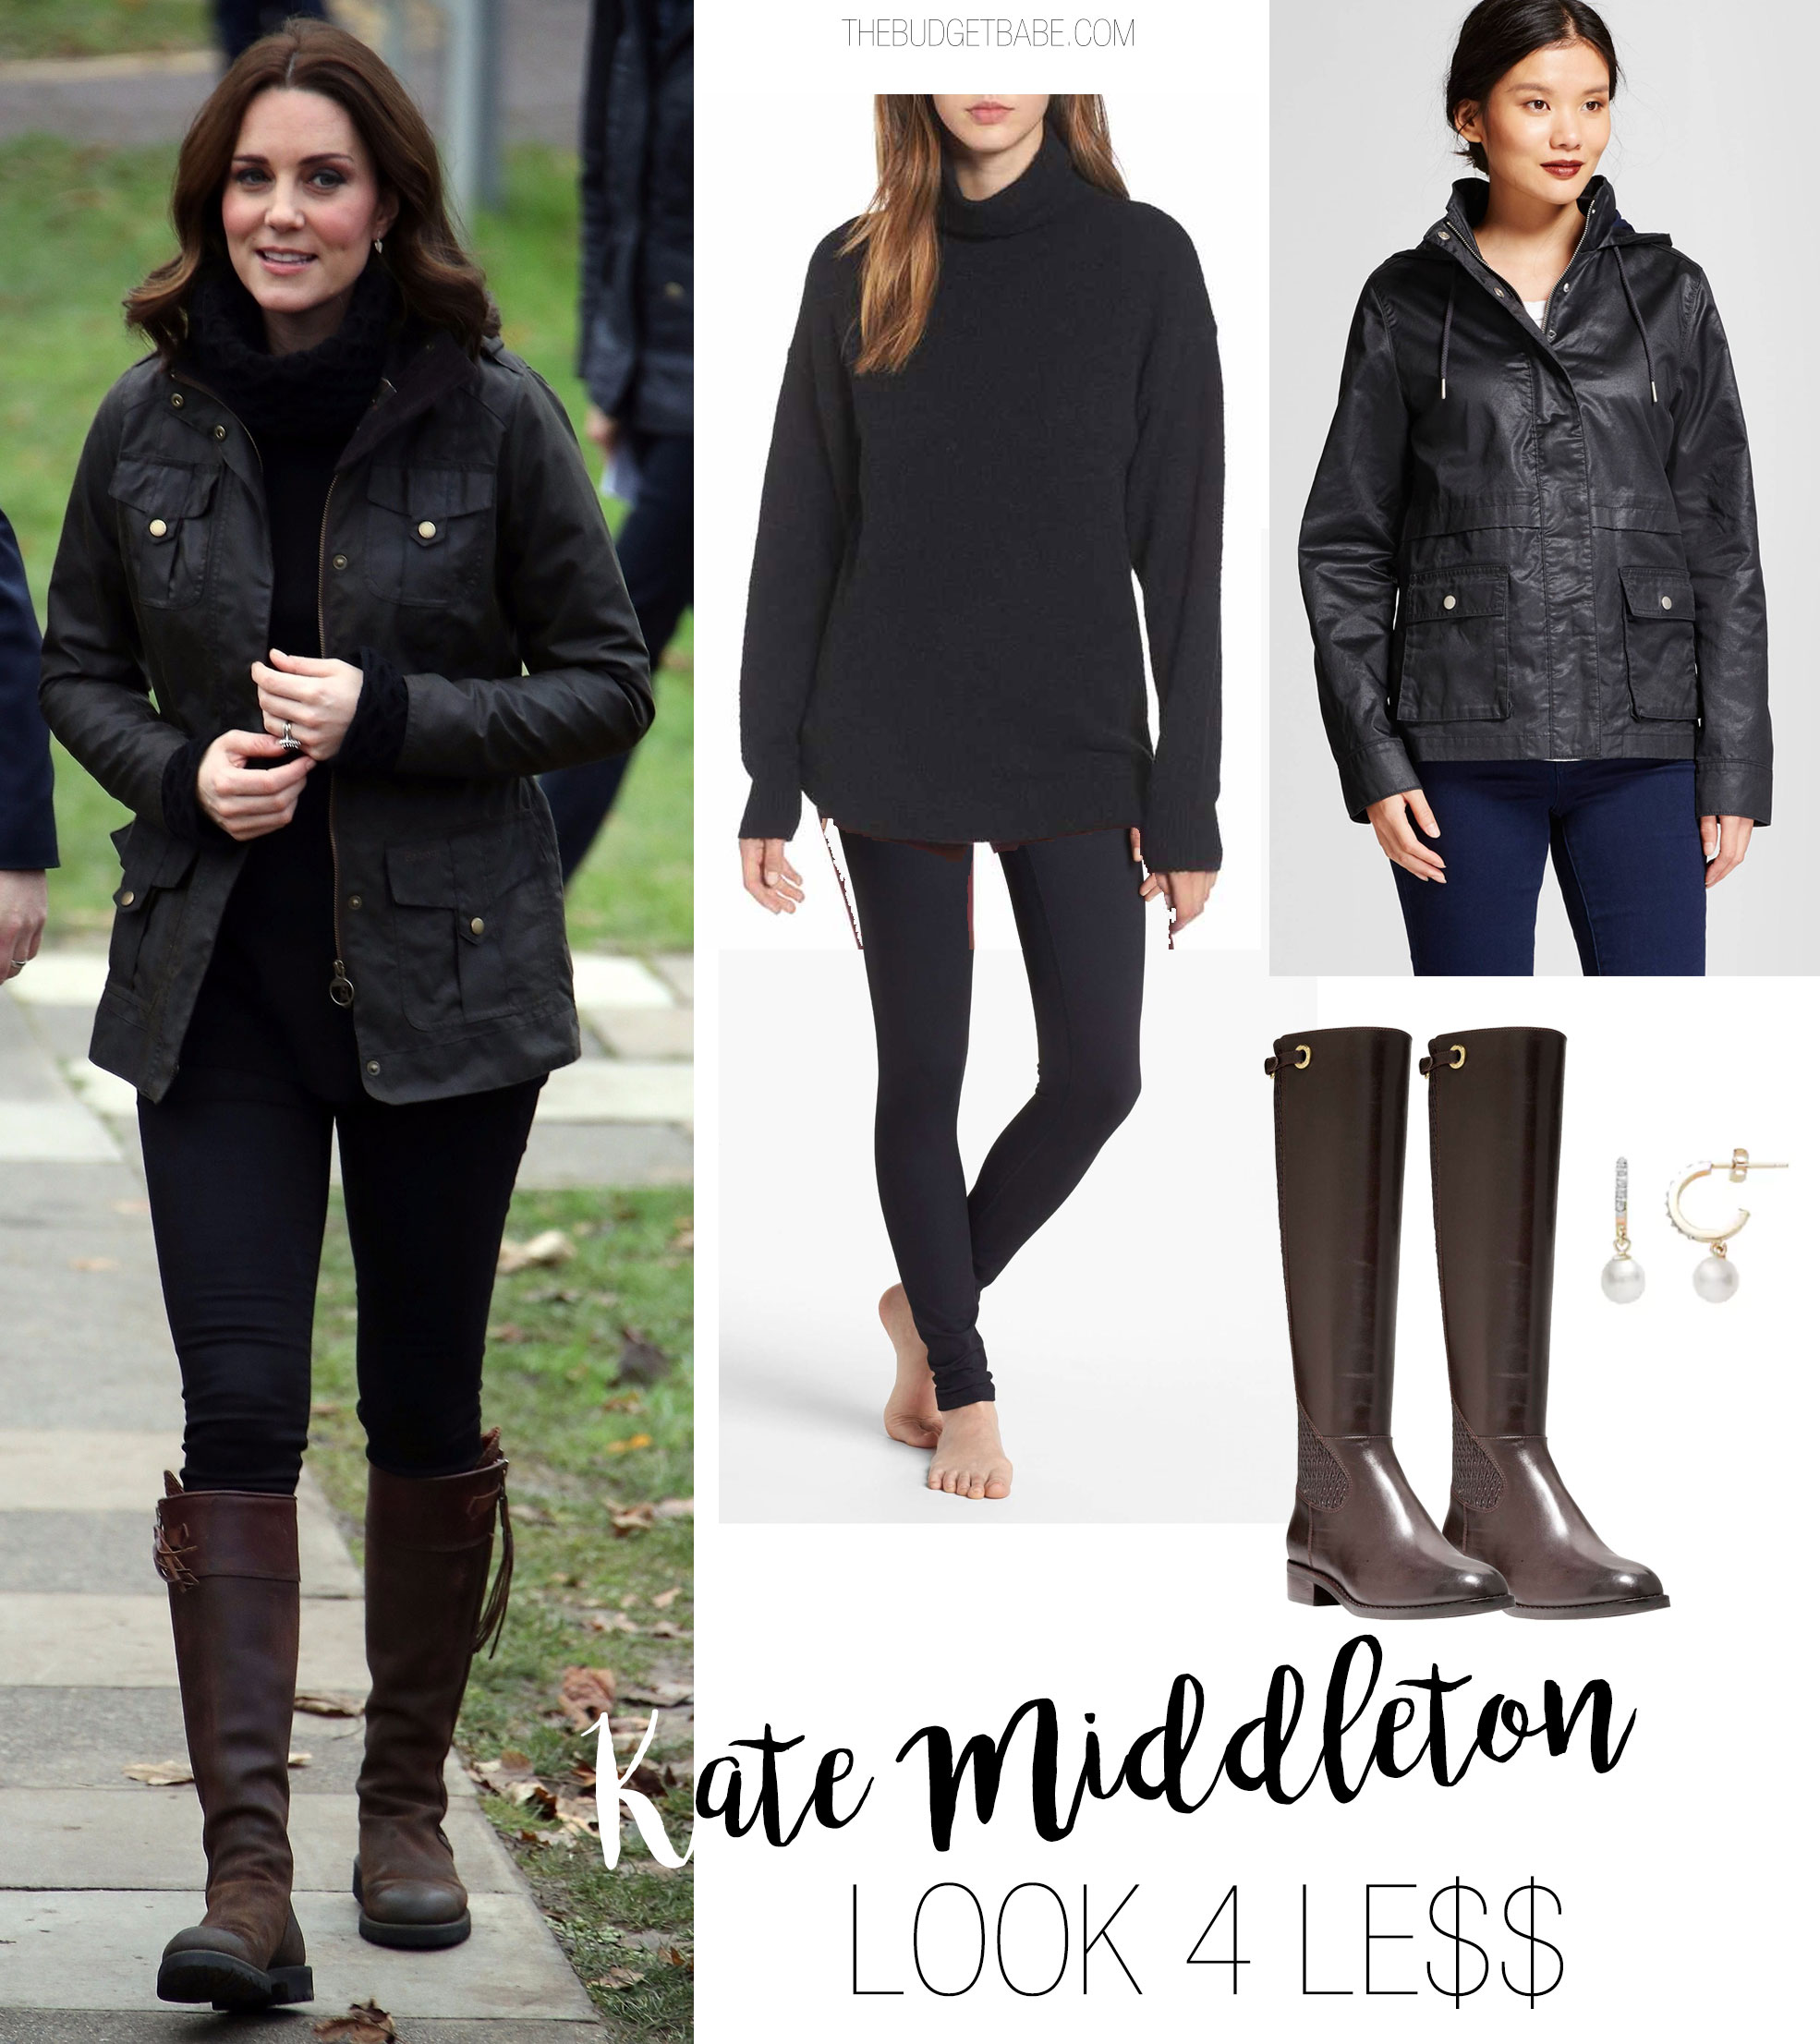 Kate Middleton's field jacket and riding boots look for less